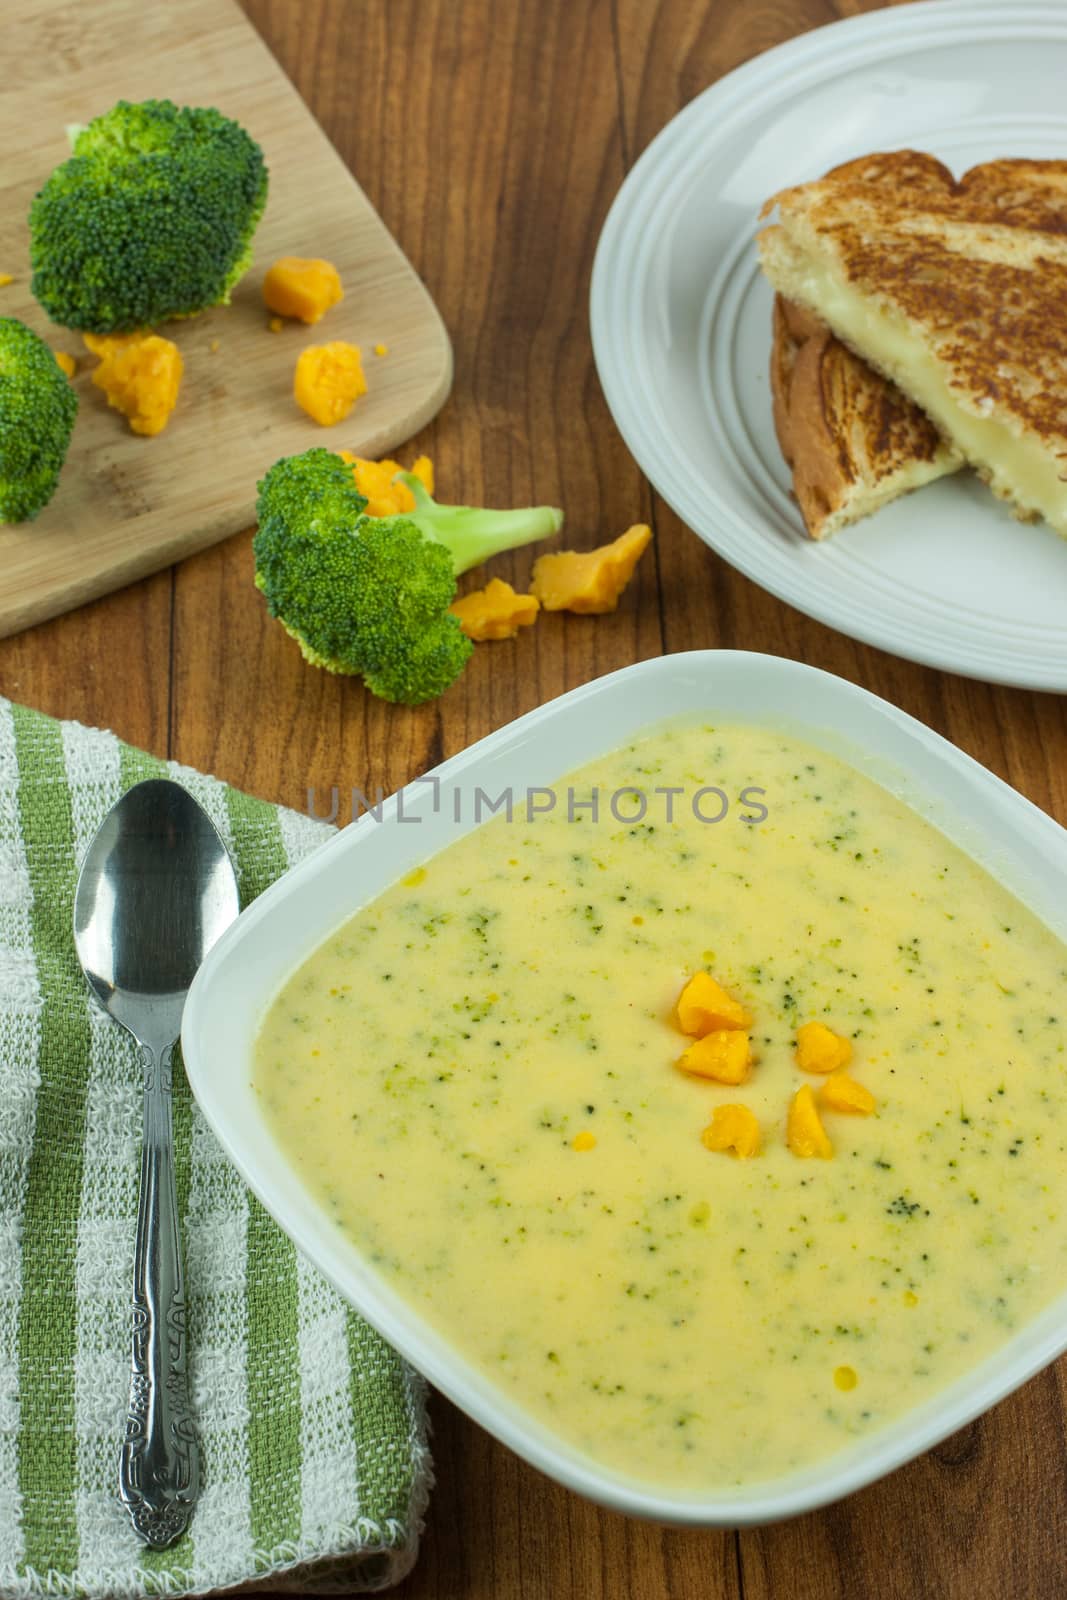 Broccoli Cheese Soup by SouthernLightStudios